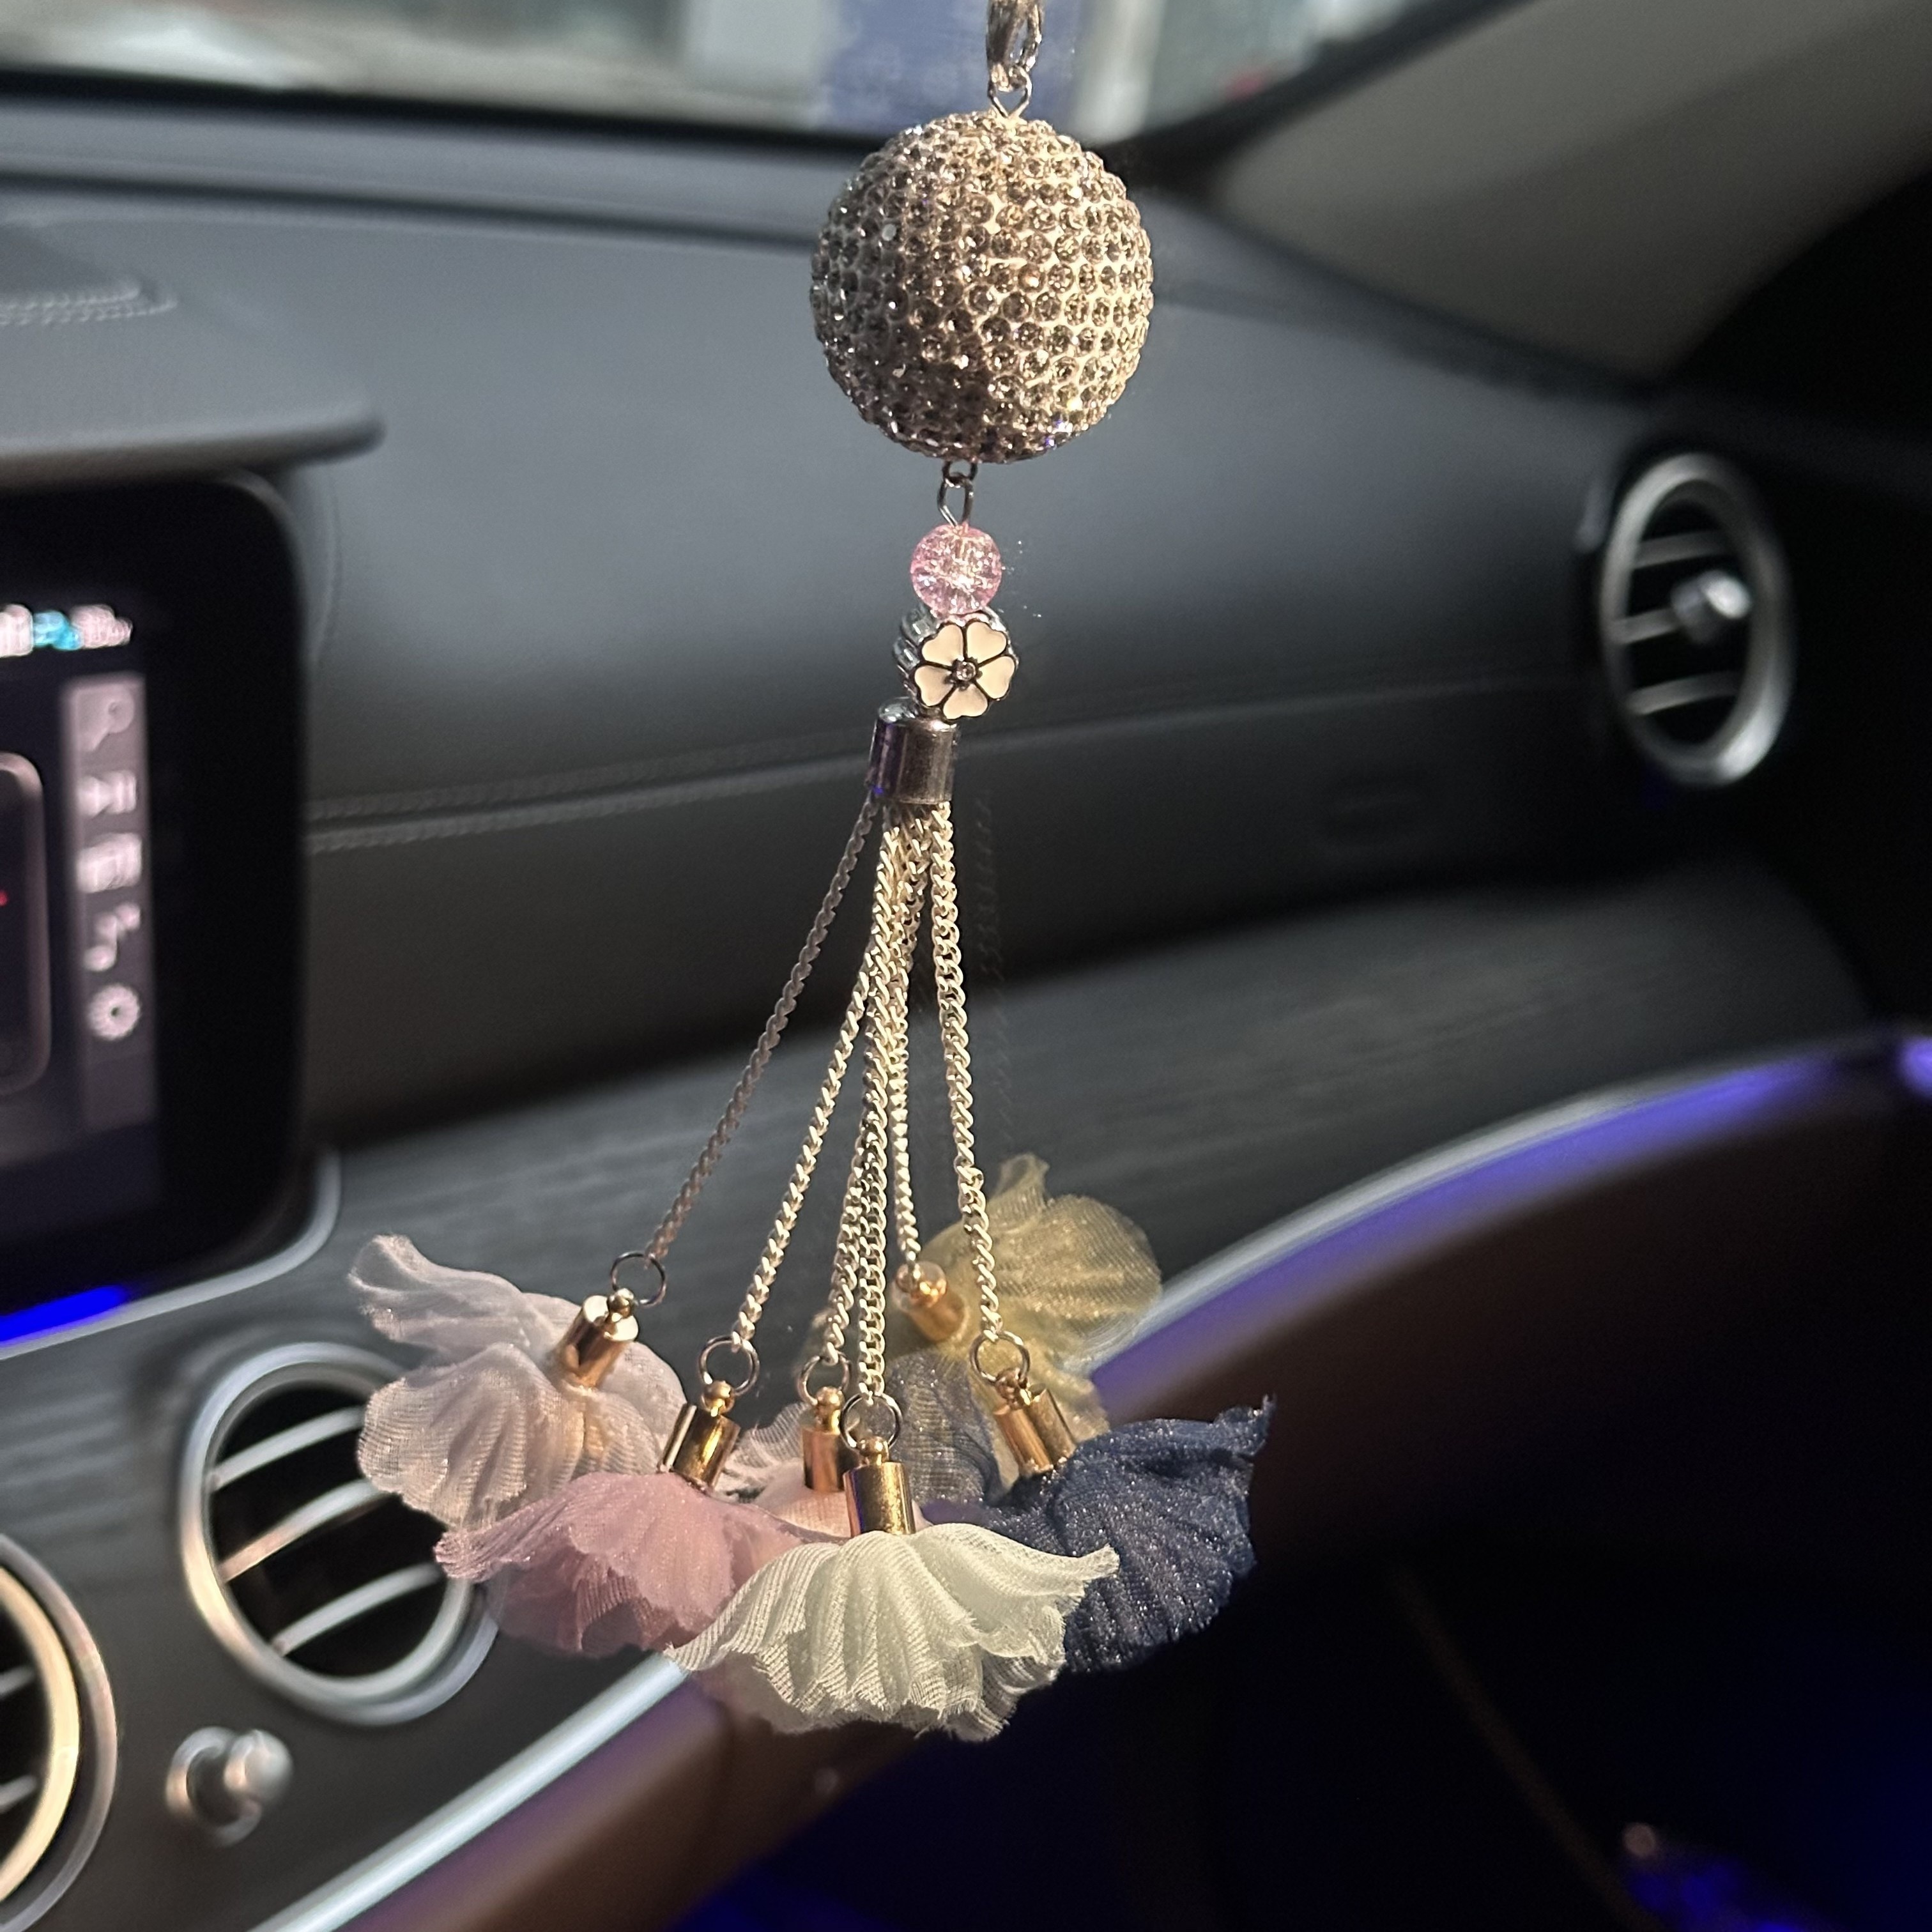 Frienda Bling Heart Diamond Car Accessories for Women, Crystal Car Rear  View Mirror Charms Car Decoration Valentine's Day Gifts Lucky Hanging  Interior